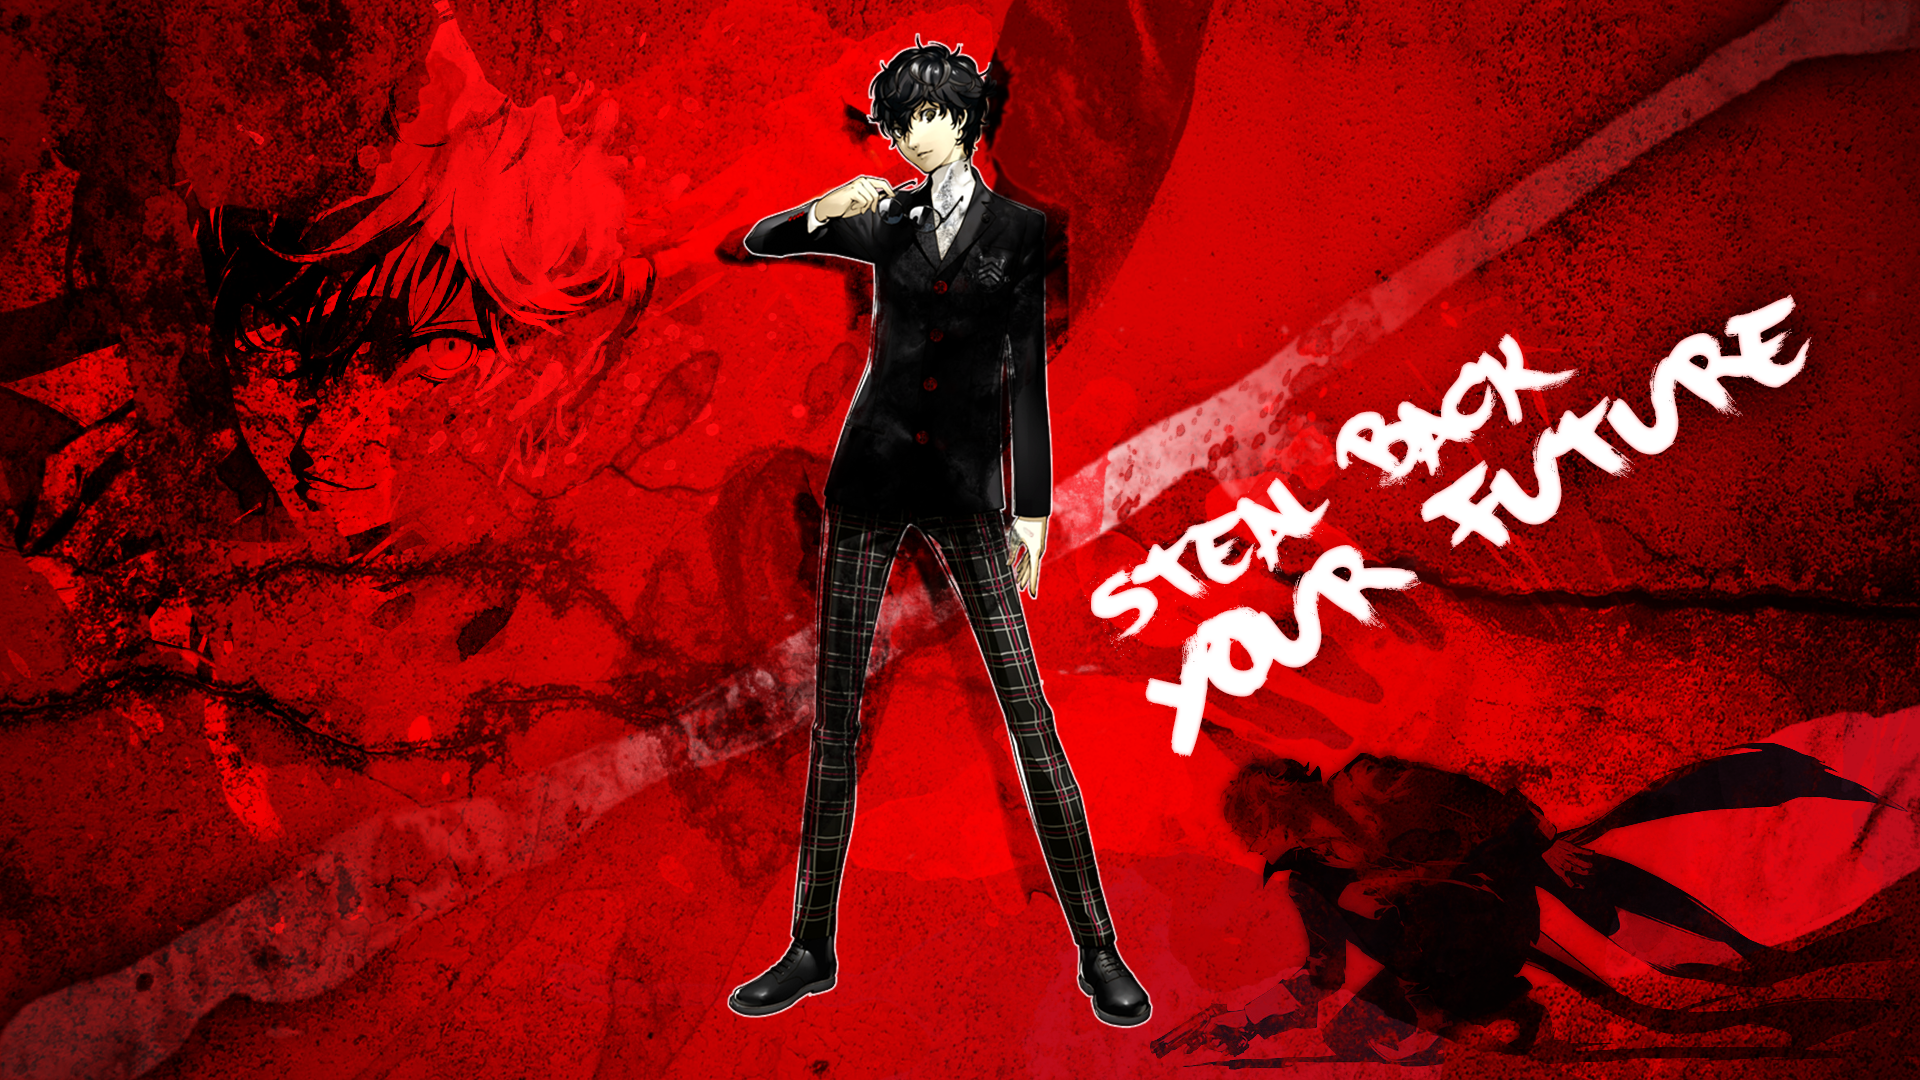 Anime 1920x1080 Persona series Persona 5 video games red background anime games anime anime boys